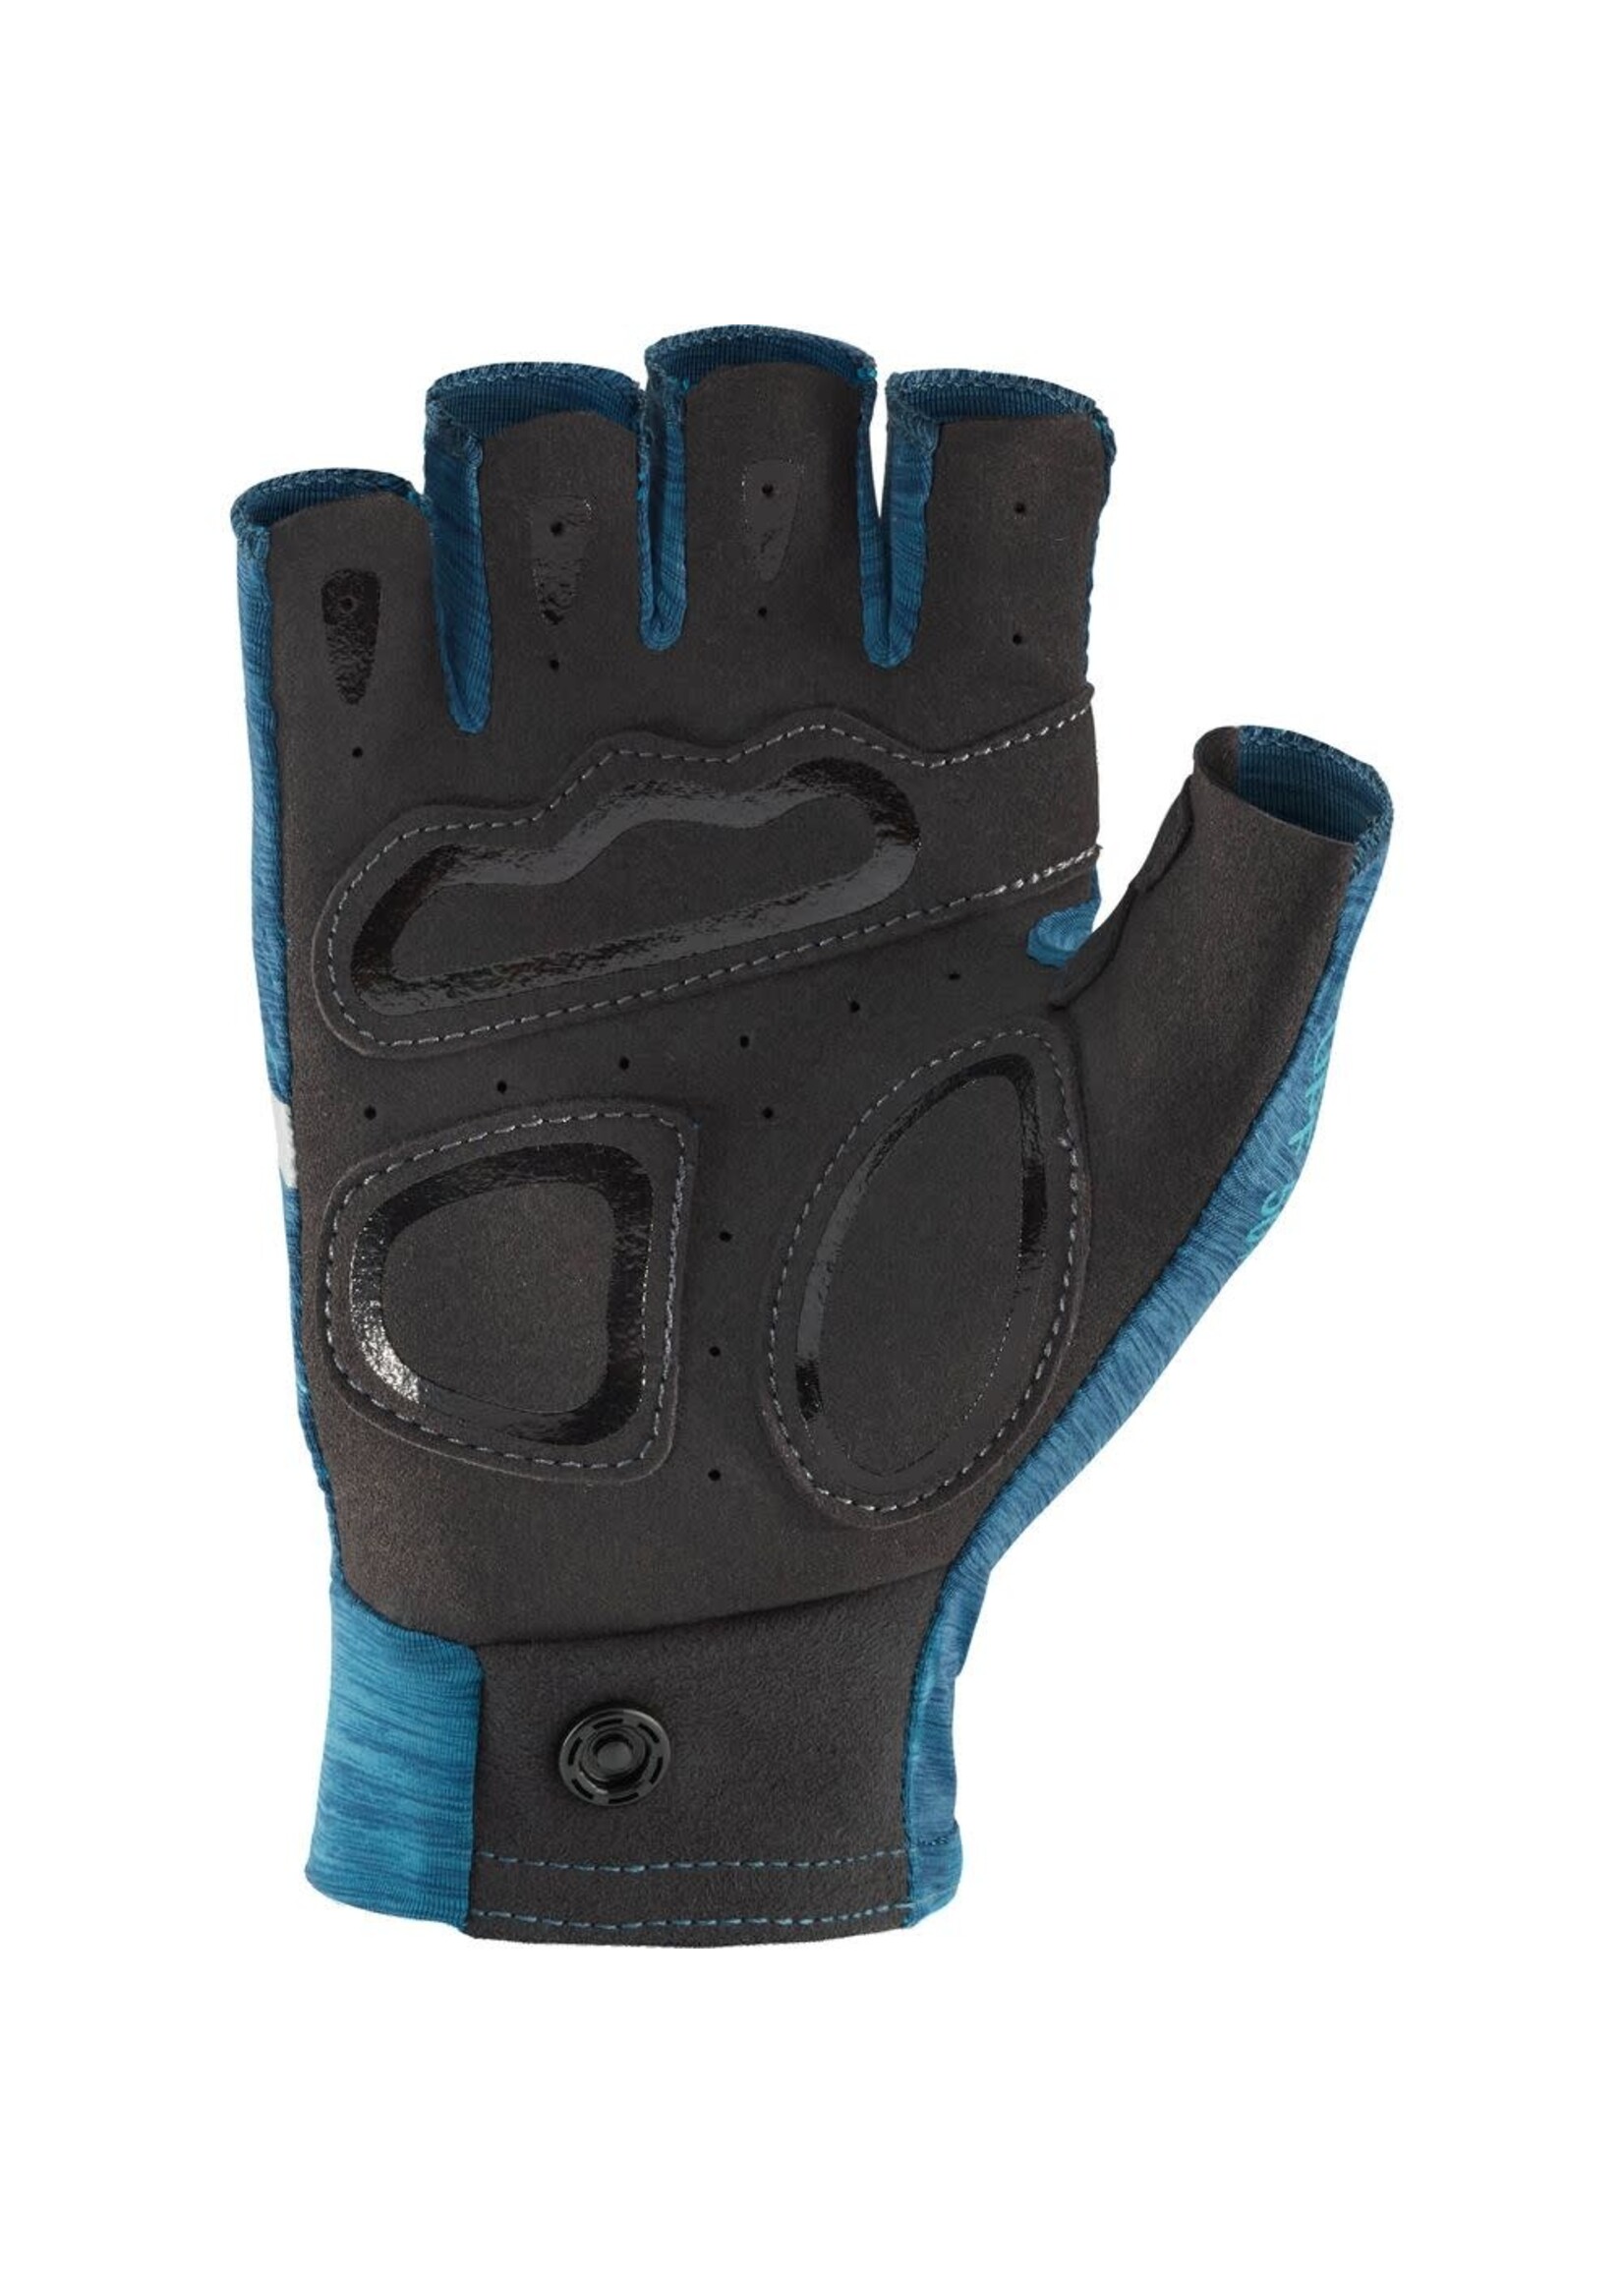 NRS NRS Mens Boater's Glove Poseidon - S